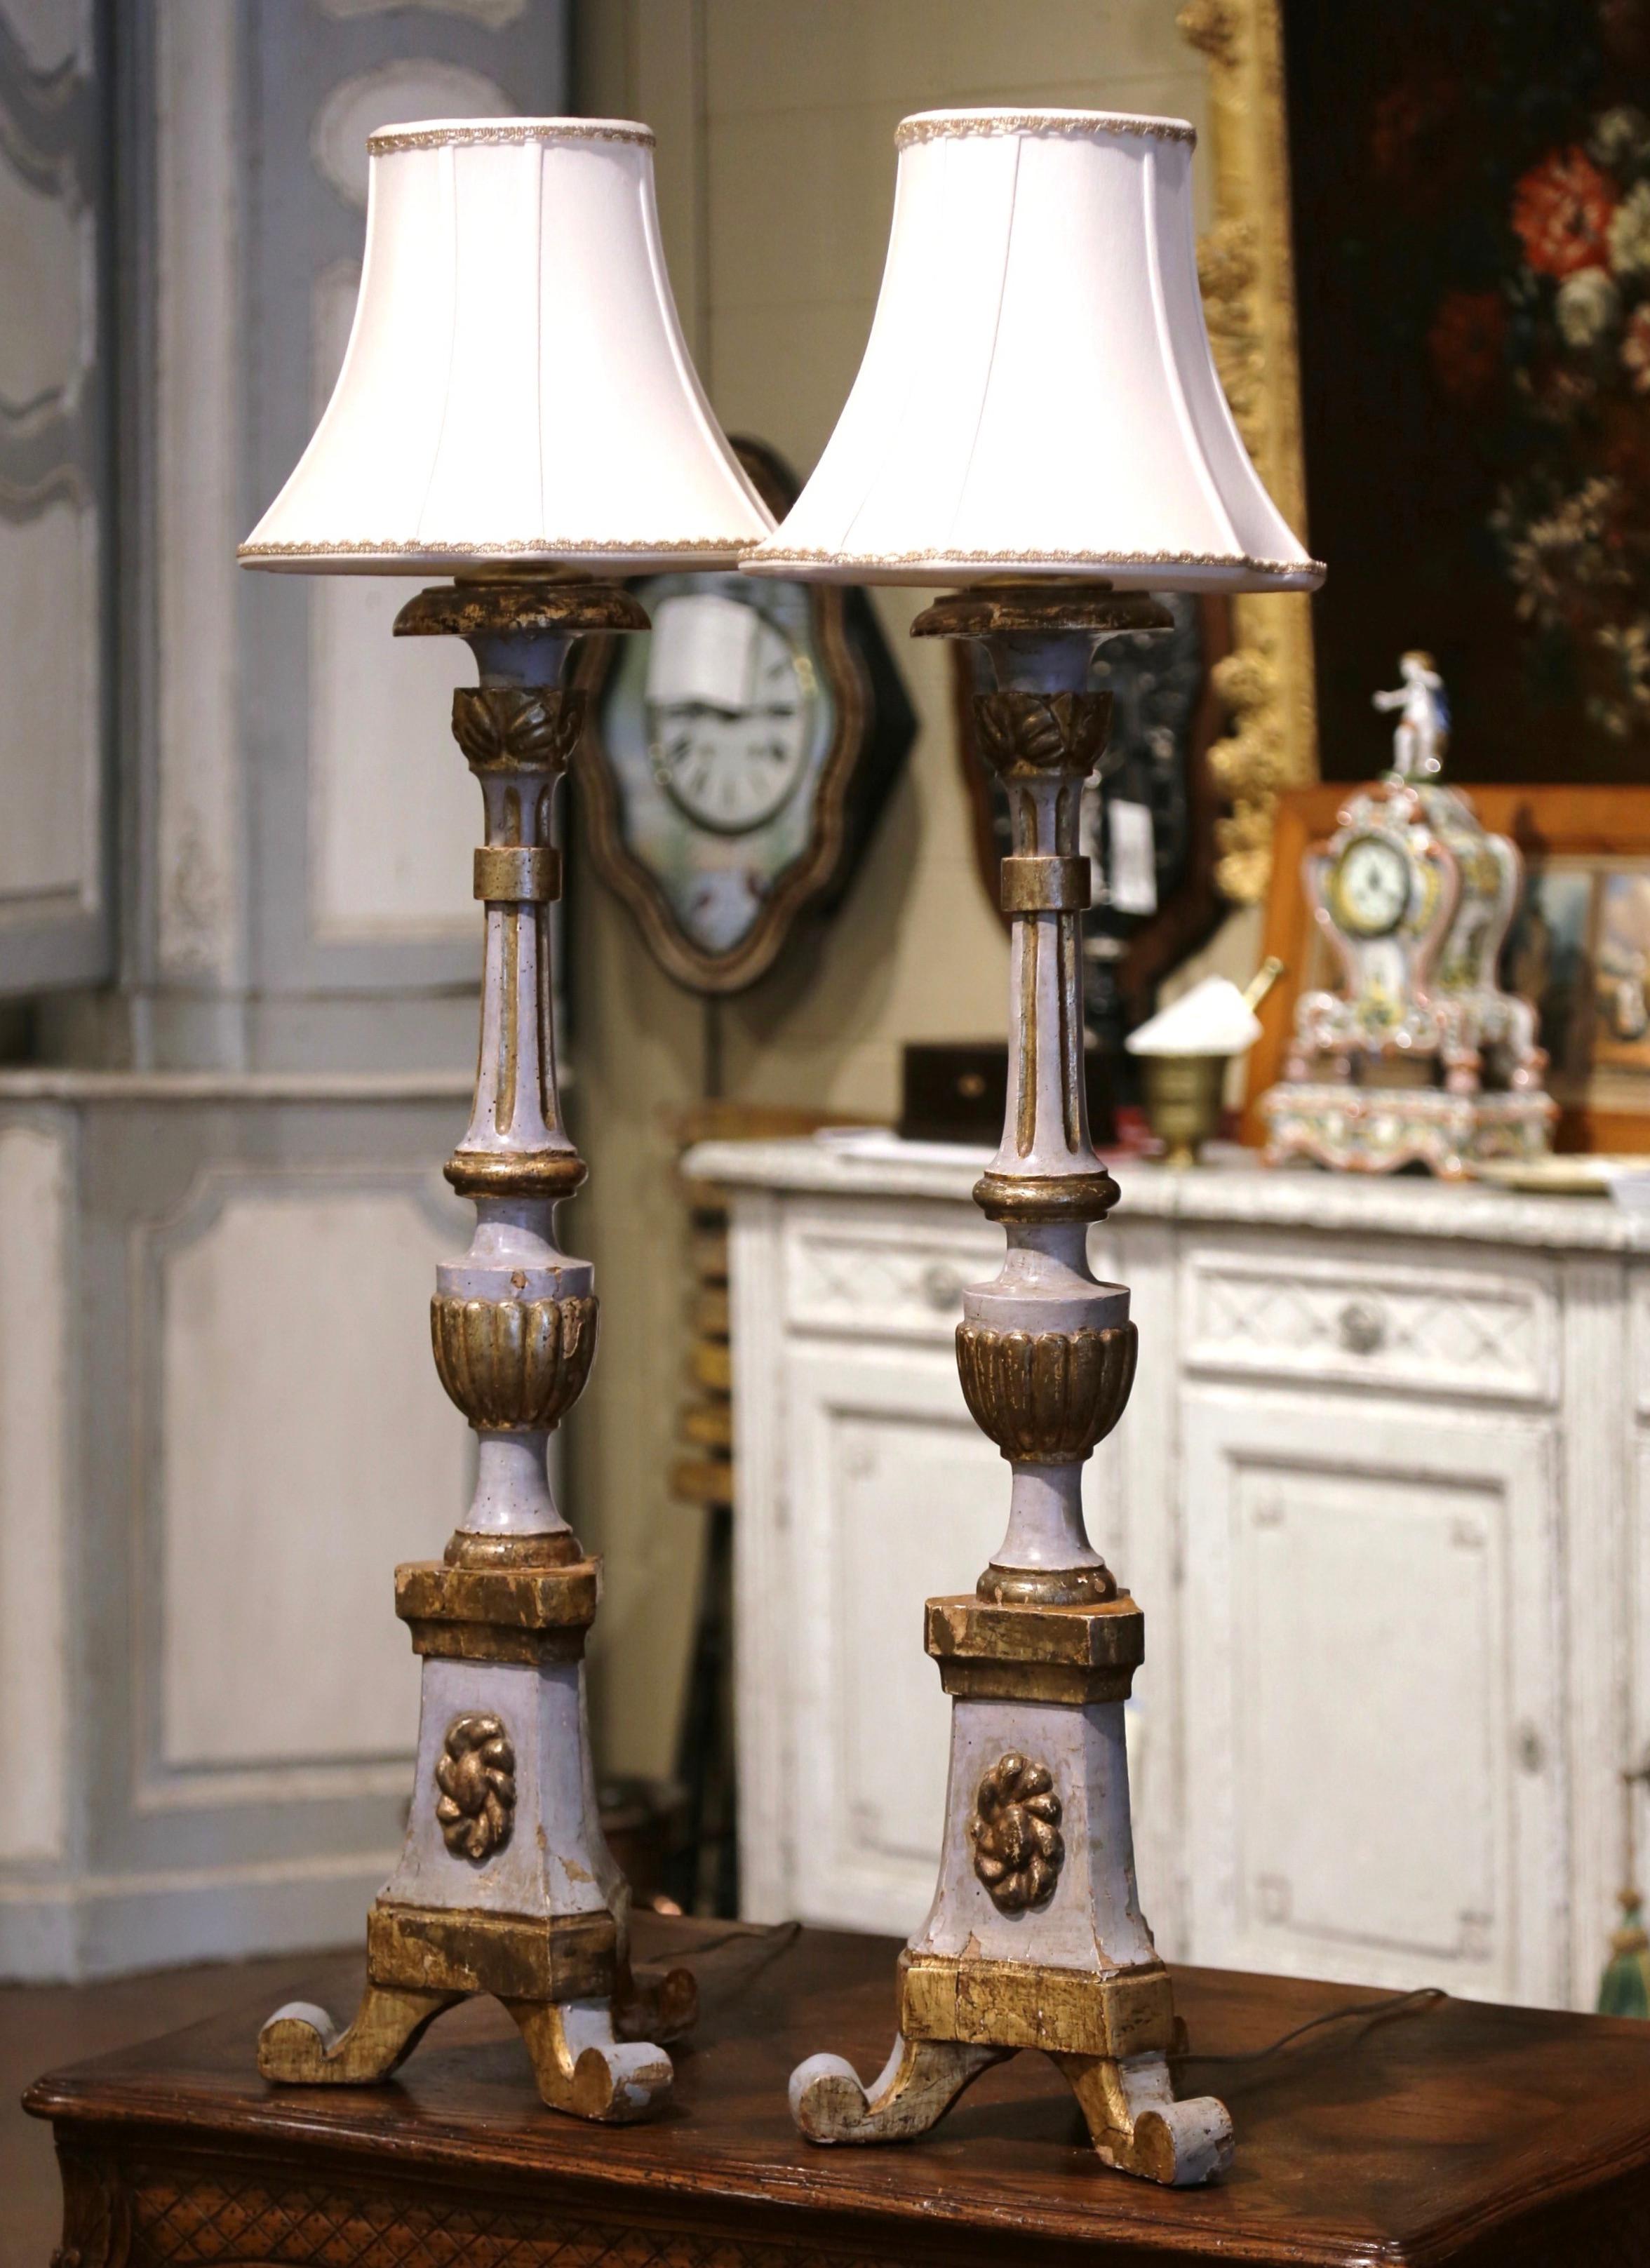 Add an air of drama and elegance to your home with this pair of antique table lamps. Crafted in Italy circa 1760 and converted into table lamp, each candlestick stands on a tripod base decorated with a carved floral medallion, and ending with